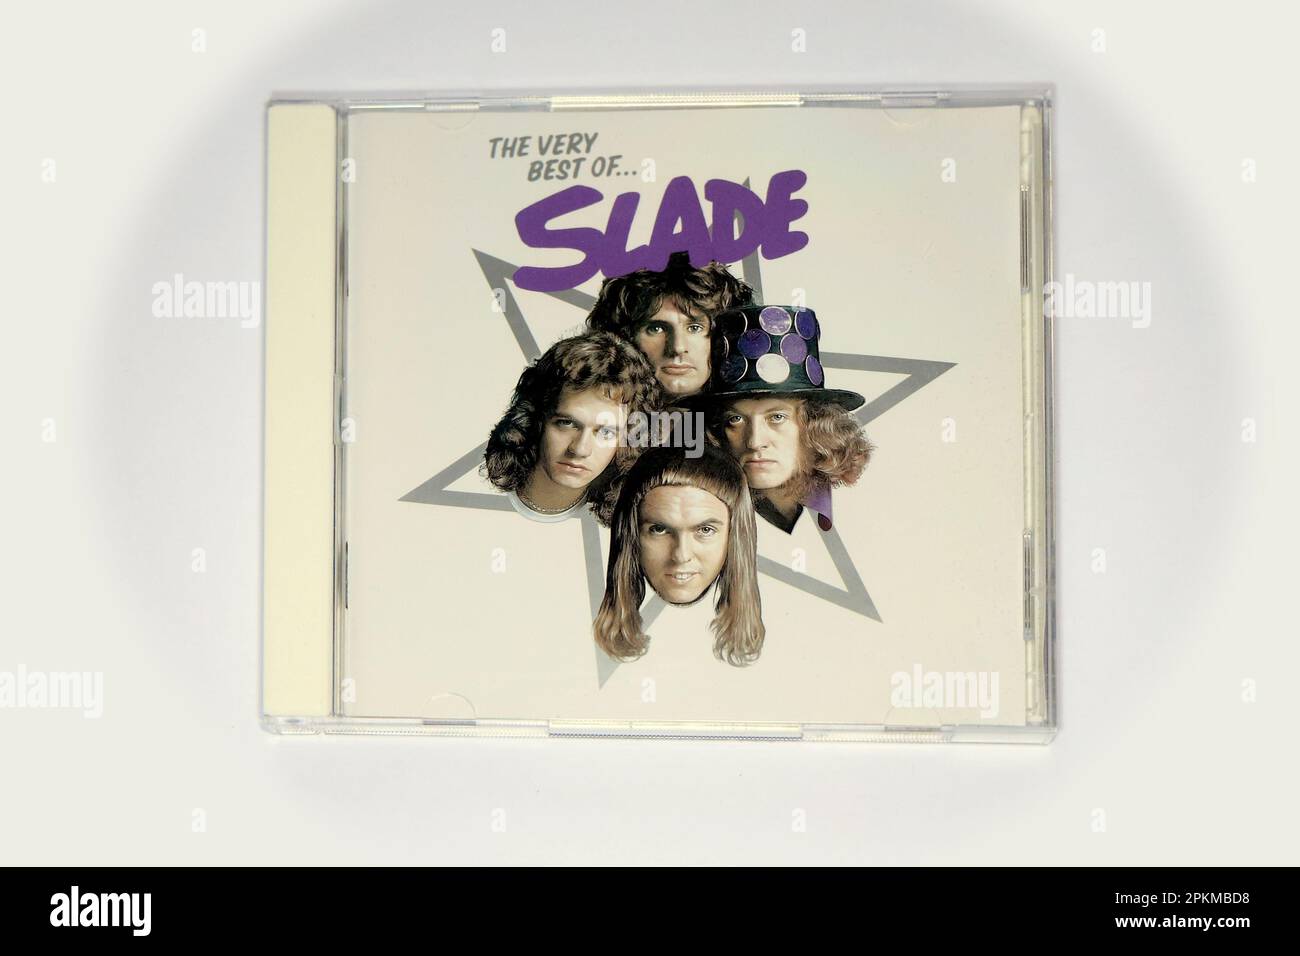 Slade - The Very Best of Slade CD cover Stock Photo